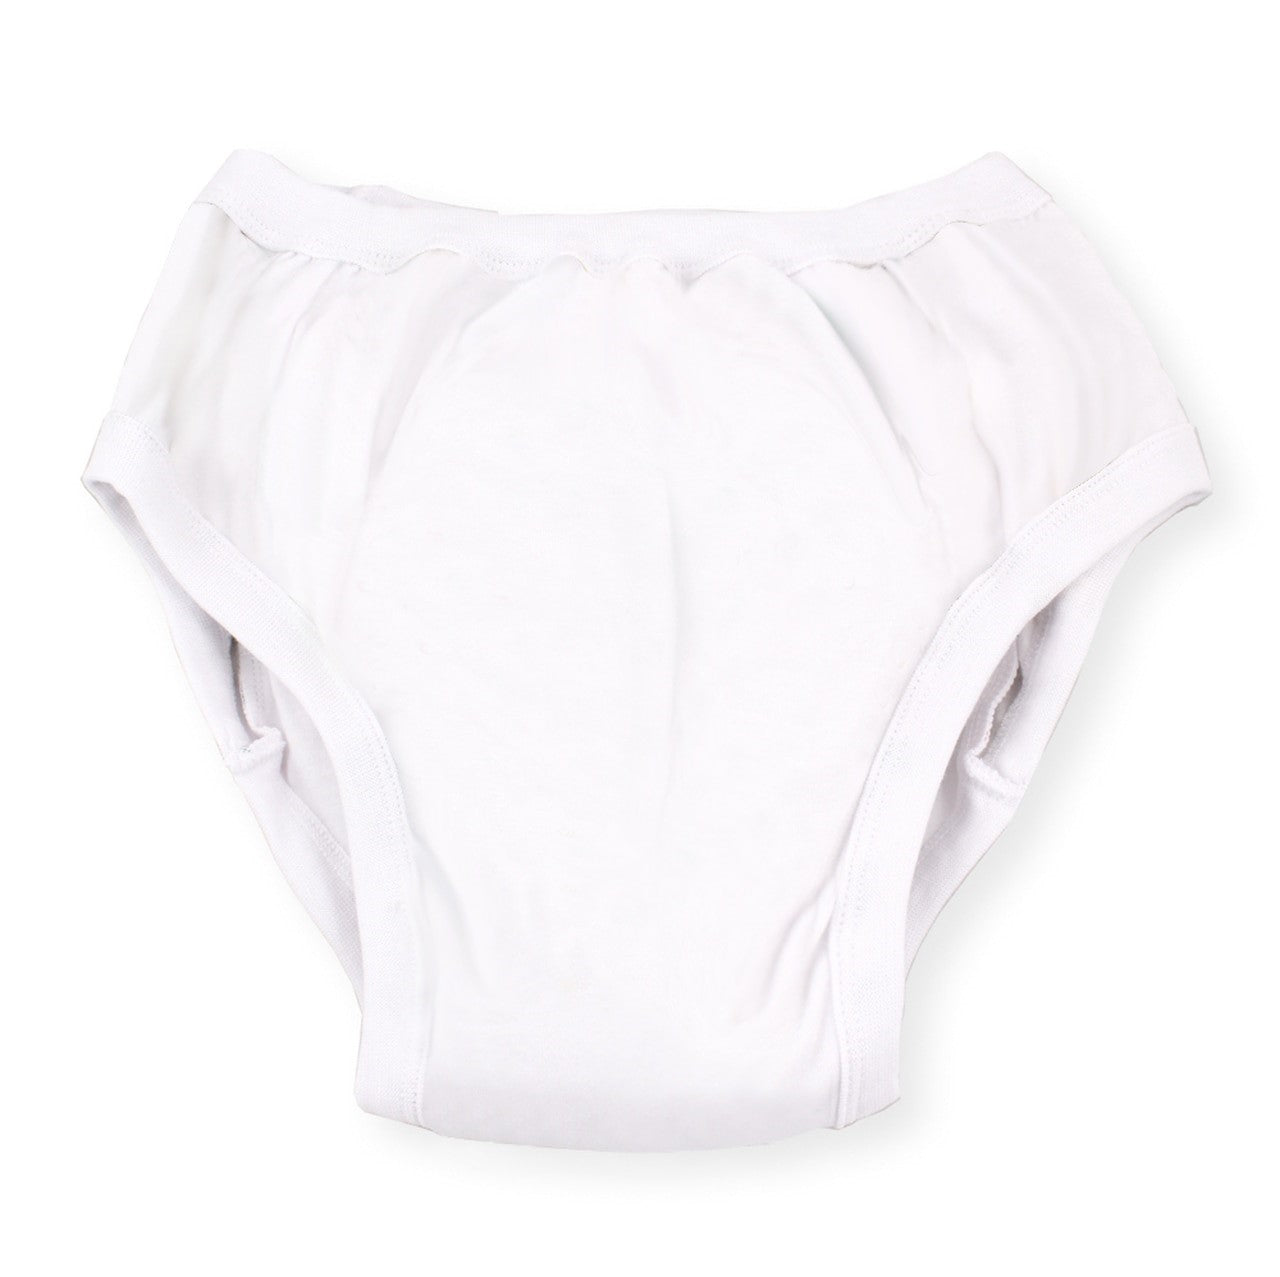 Disposable Training Pants - Shop for Training Pants Products Online